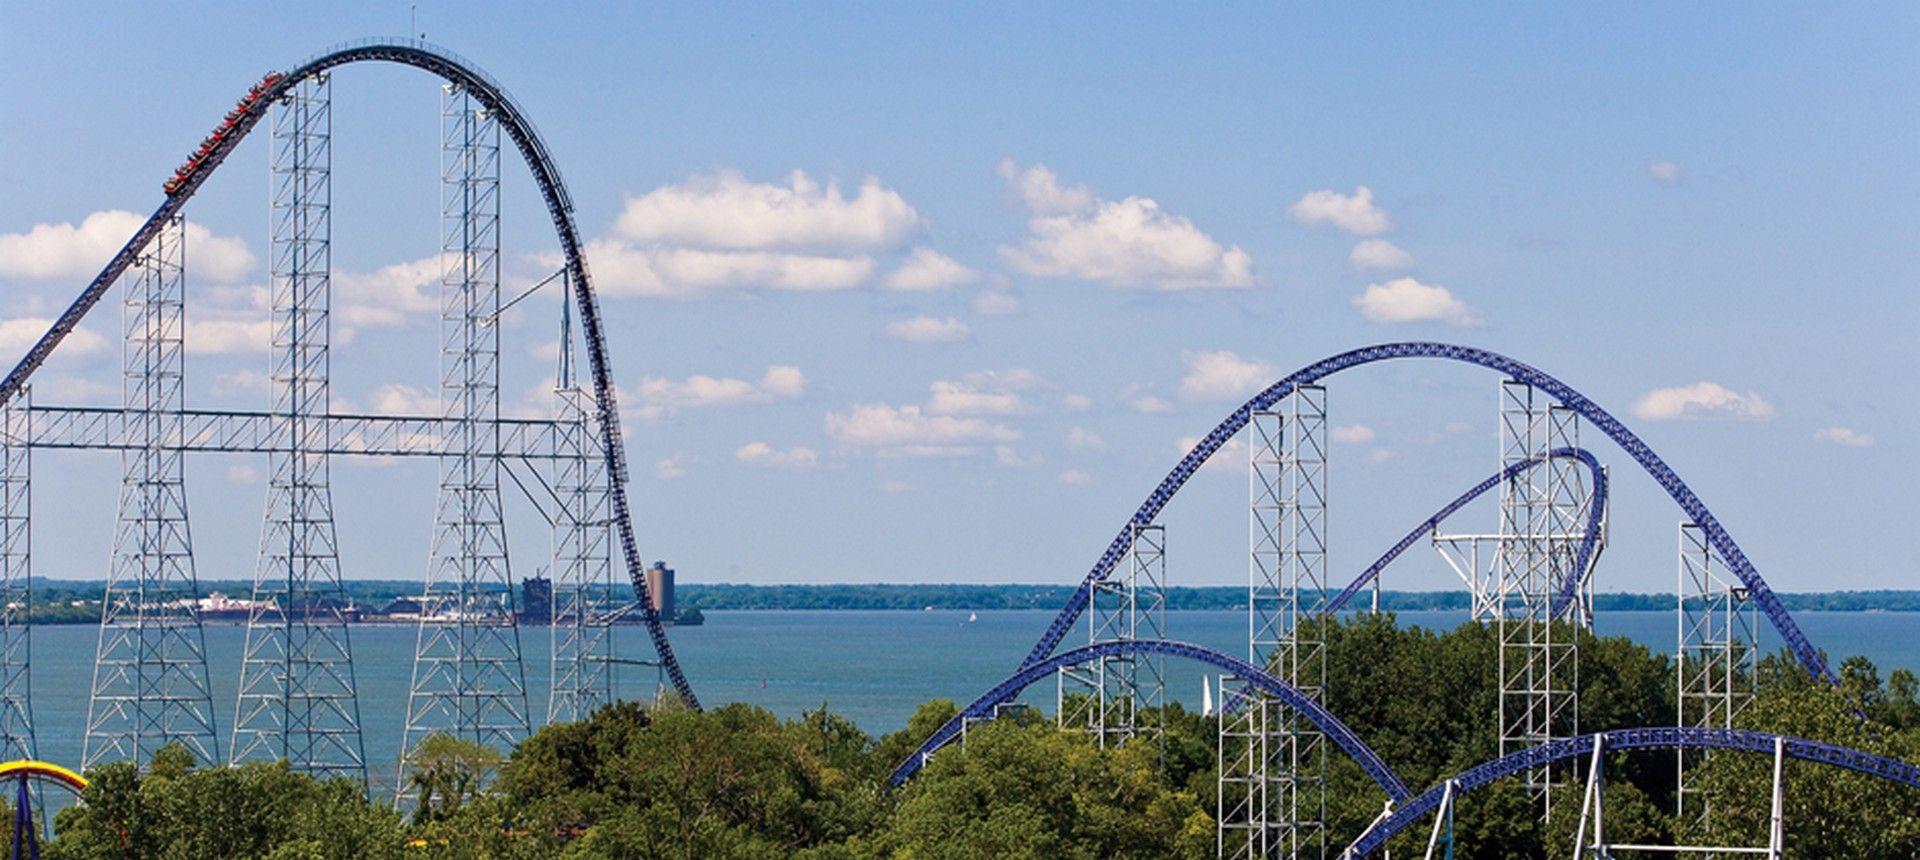 Rollercoaster Photos  Videos on Instagram  No matter sunrise or sunset Cedar  Point brings exciting thrills ea  Cedar point Roller coaster Family  road trips